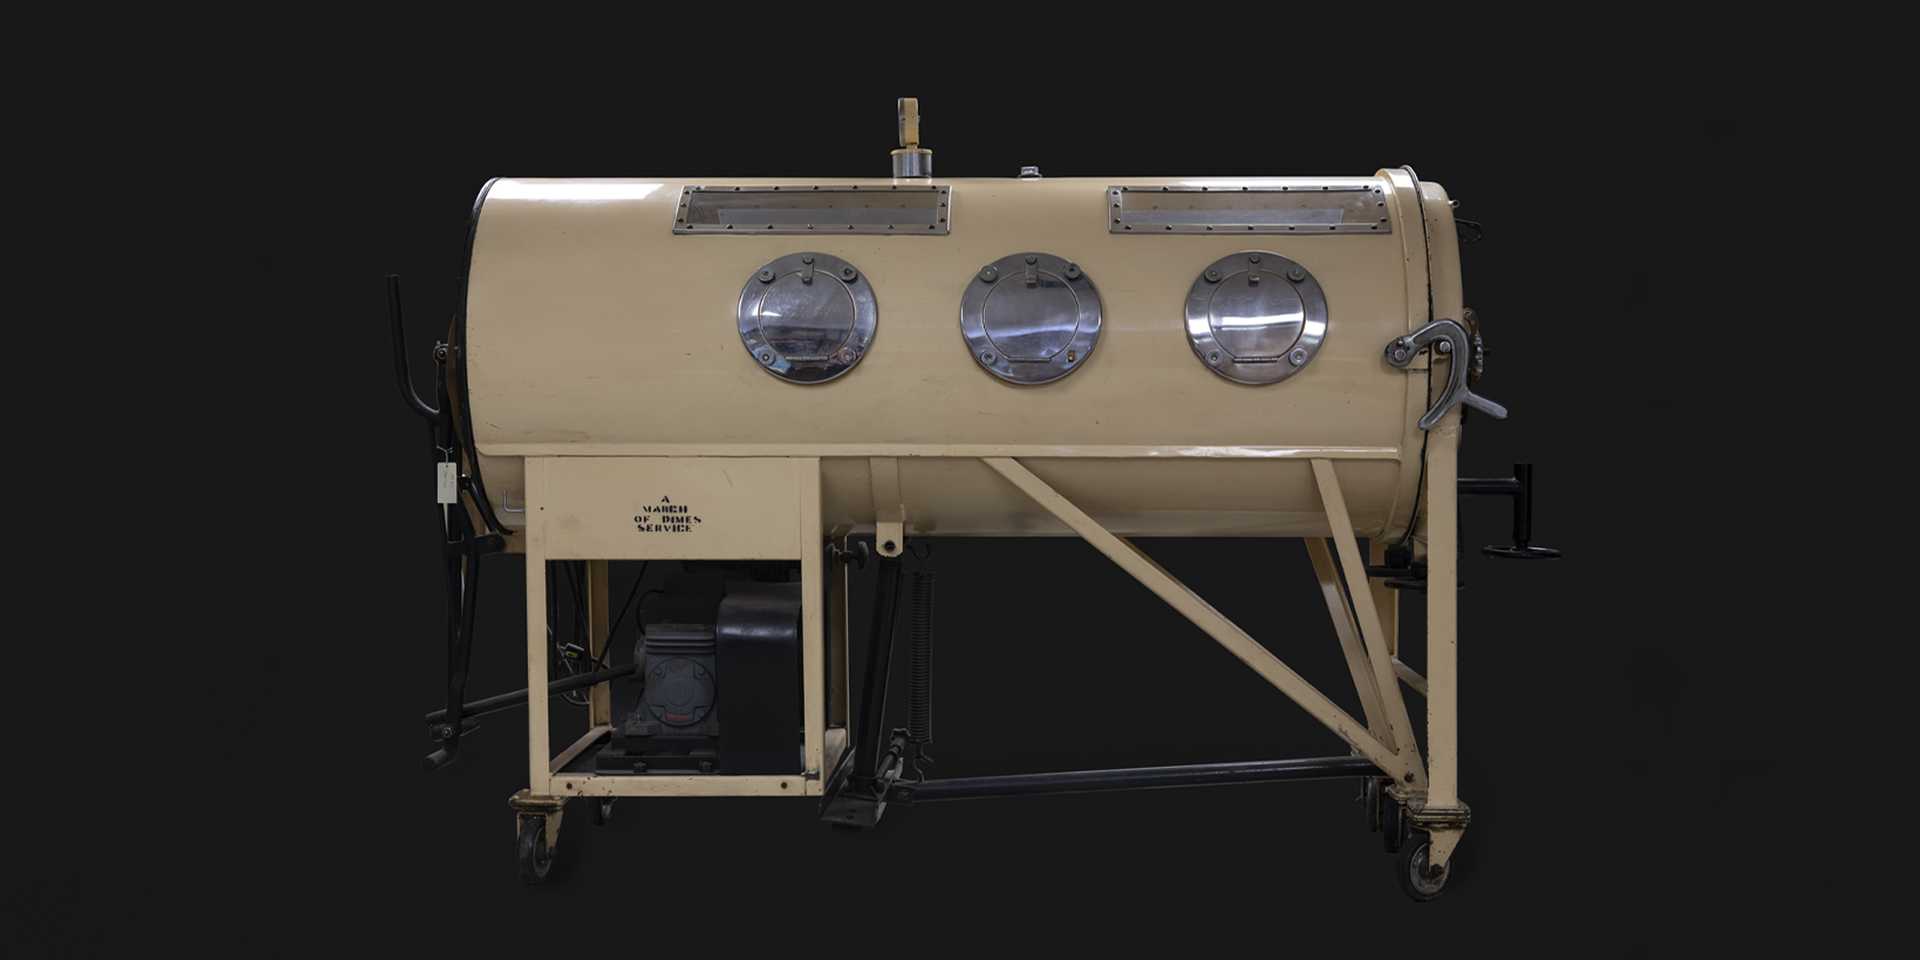 Yellow iron lung against black background